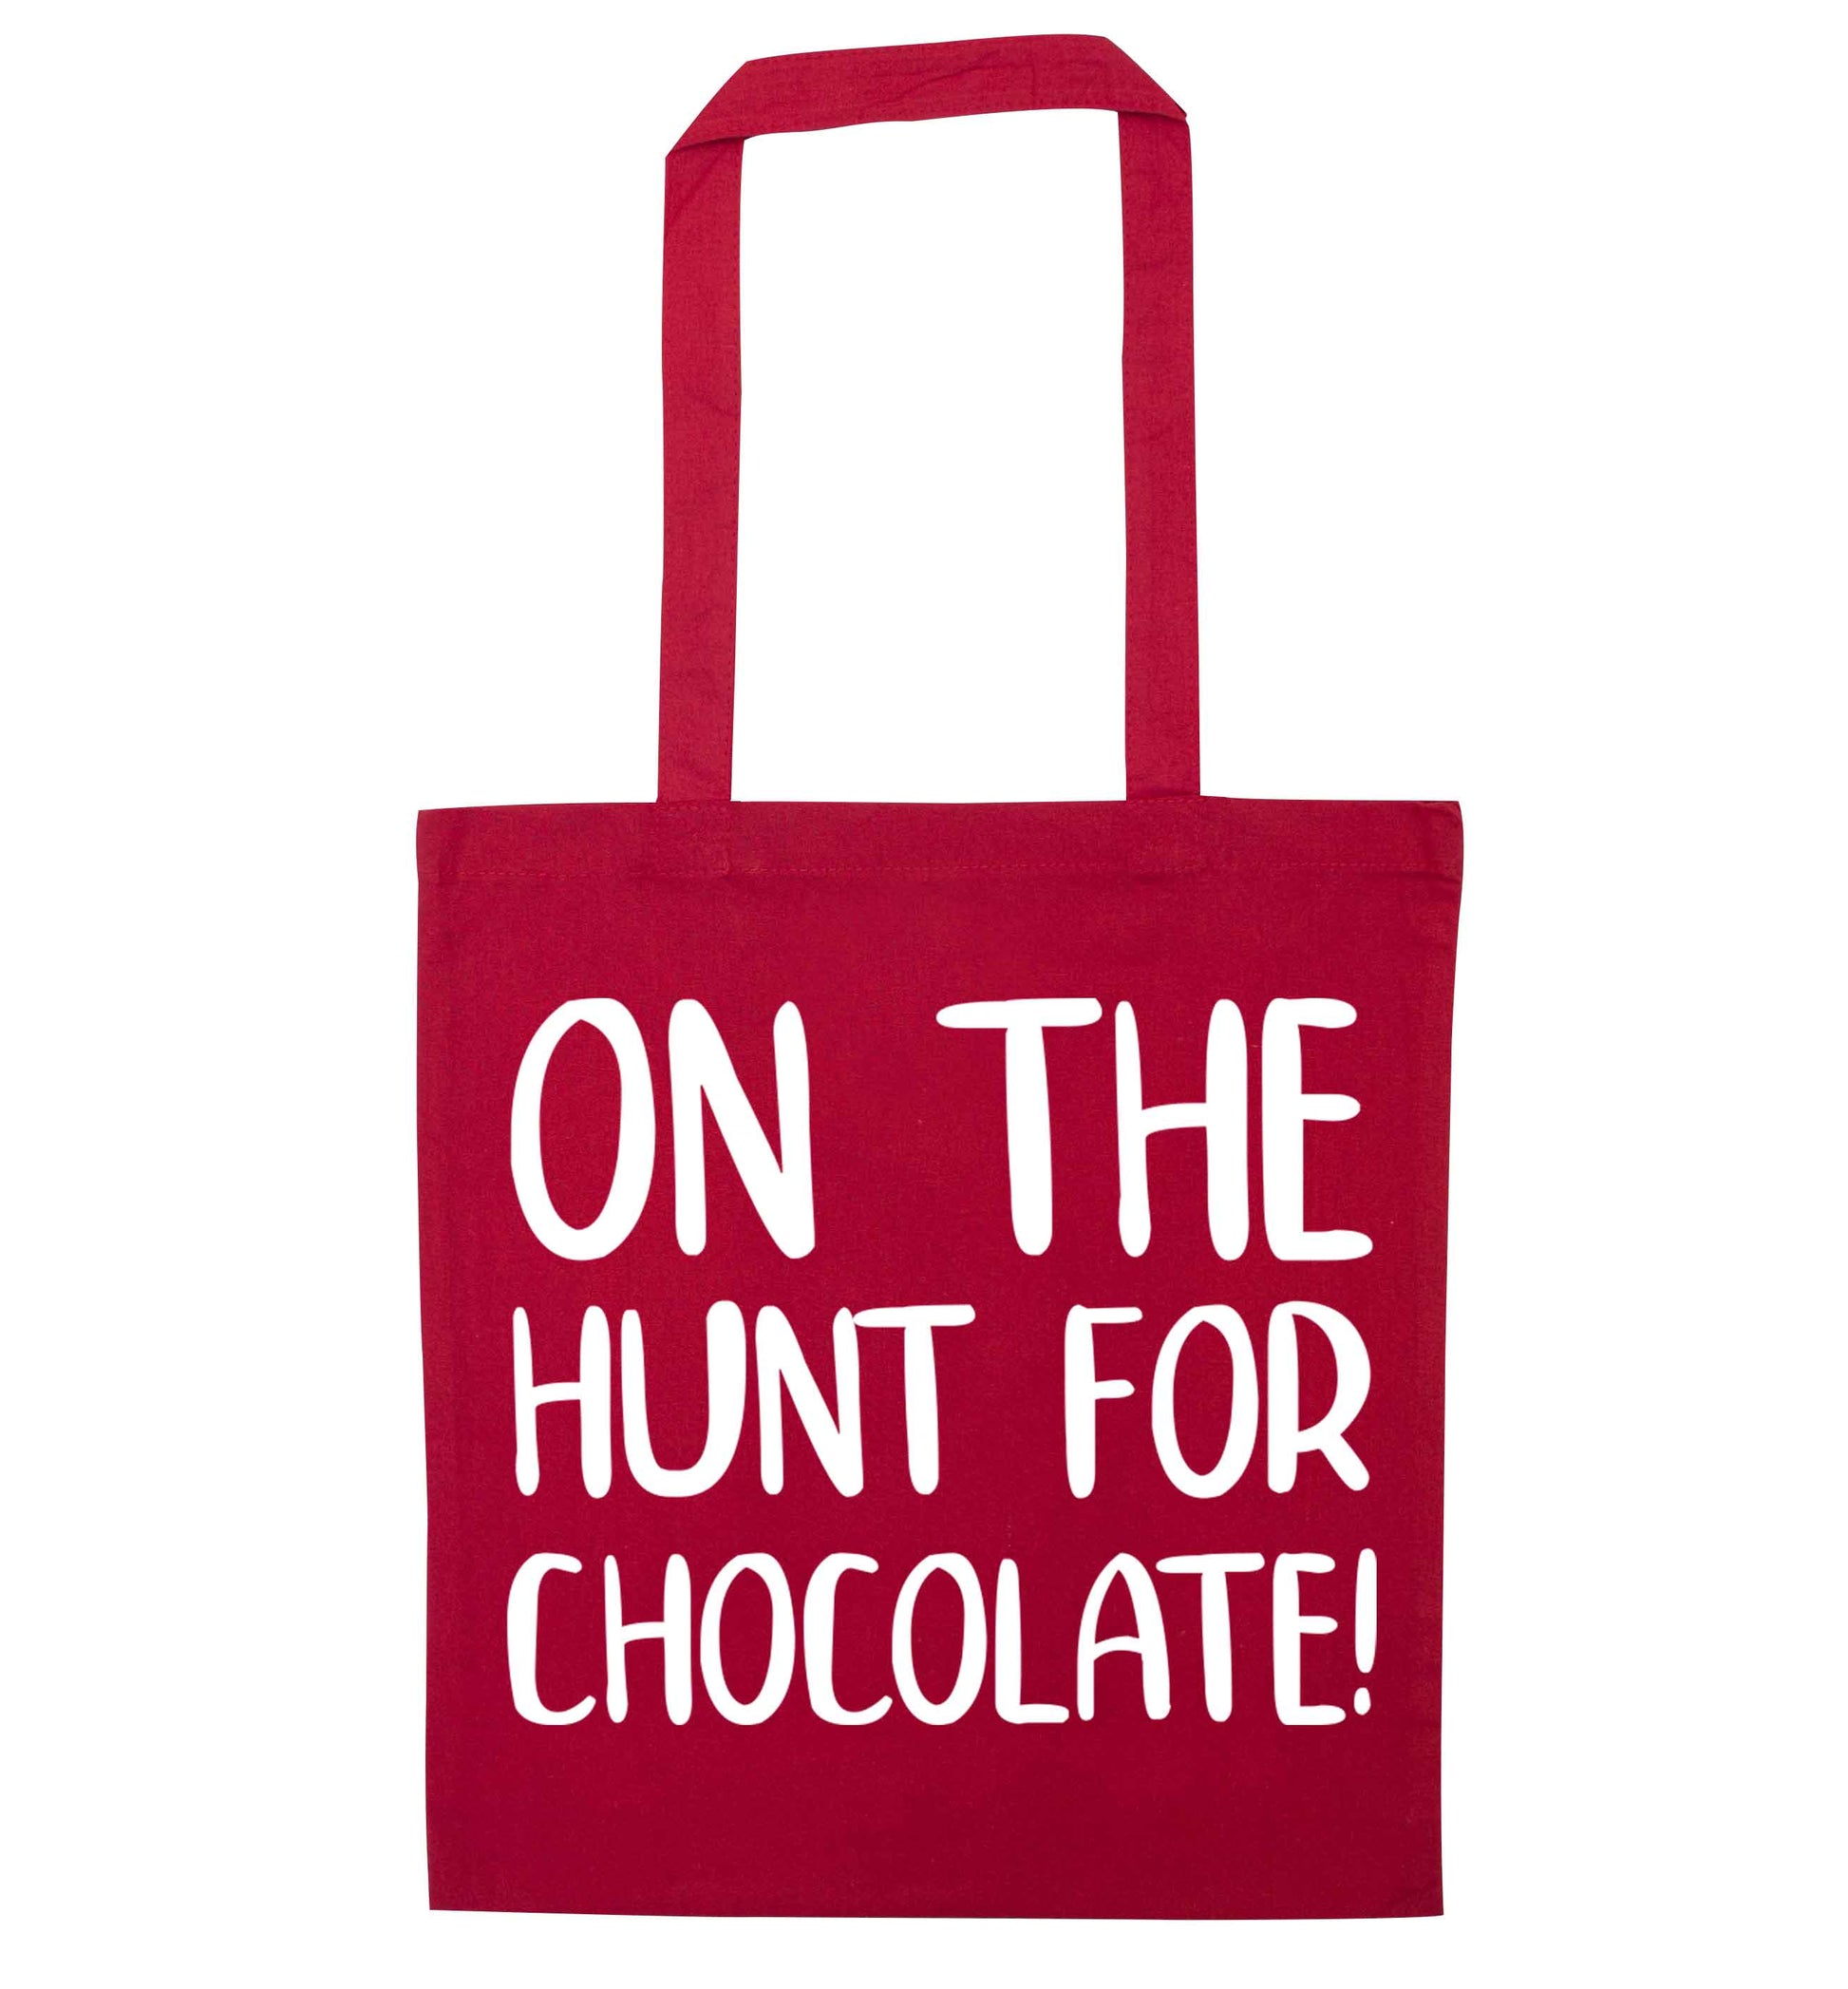 On the hunt for chocolate! red tote bag